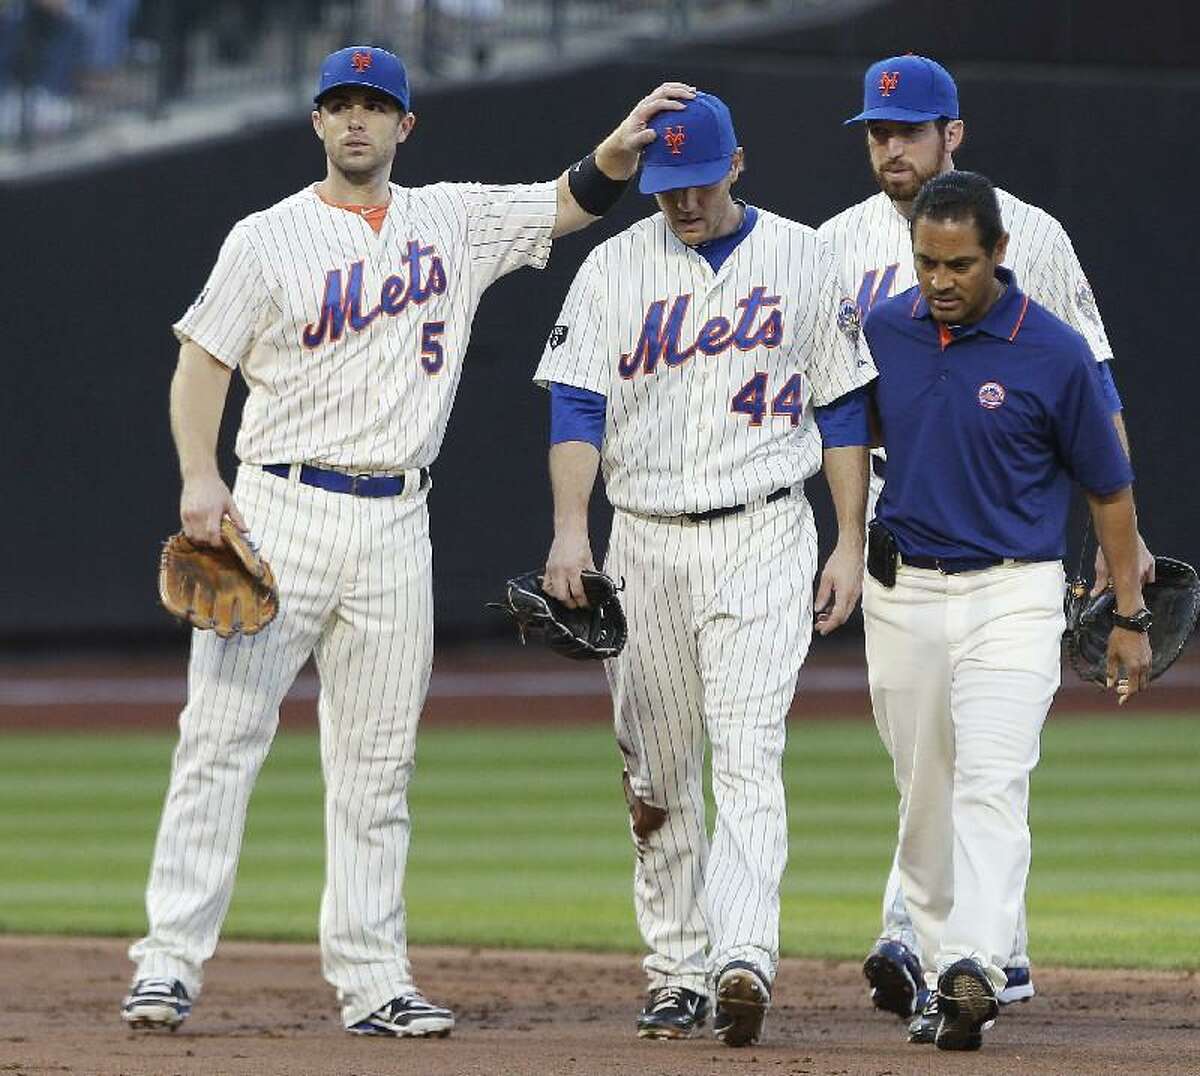 ASSOCIATED PRESS New York Mets third baseman David Wright (5) gives encouragement to teammate Jason Bay (44) as Bay is helped off the field after being injured on a play during the second inning of Friday's game against the Cincinnati Reds in New York.